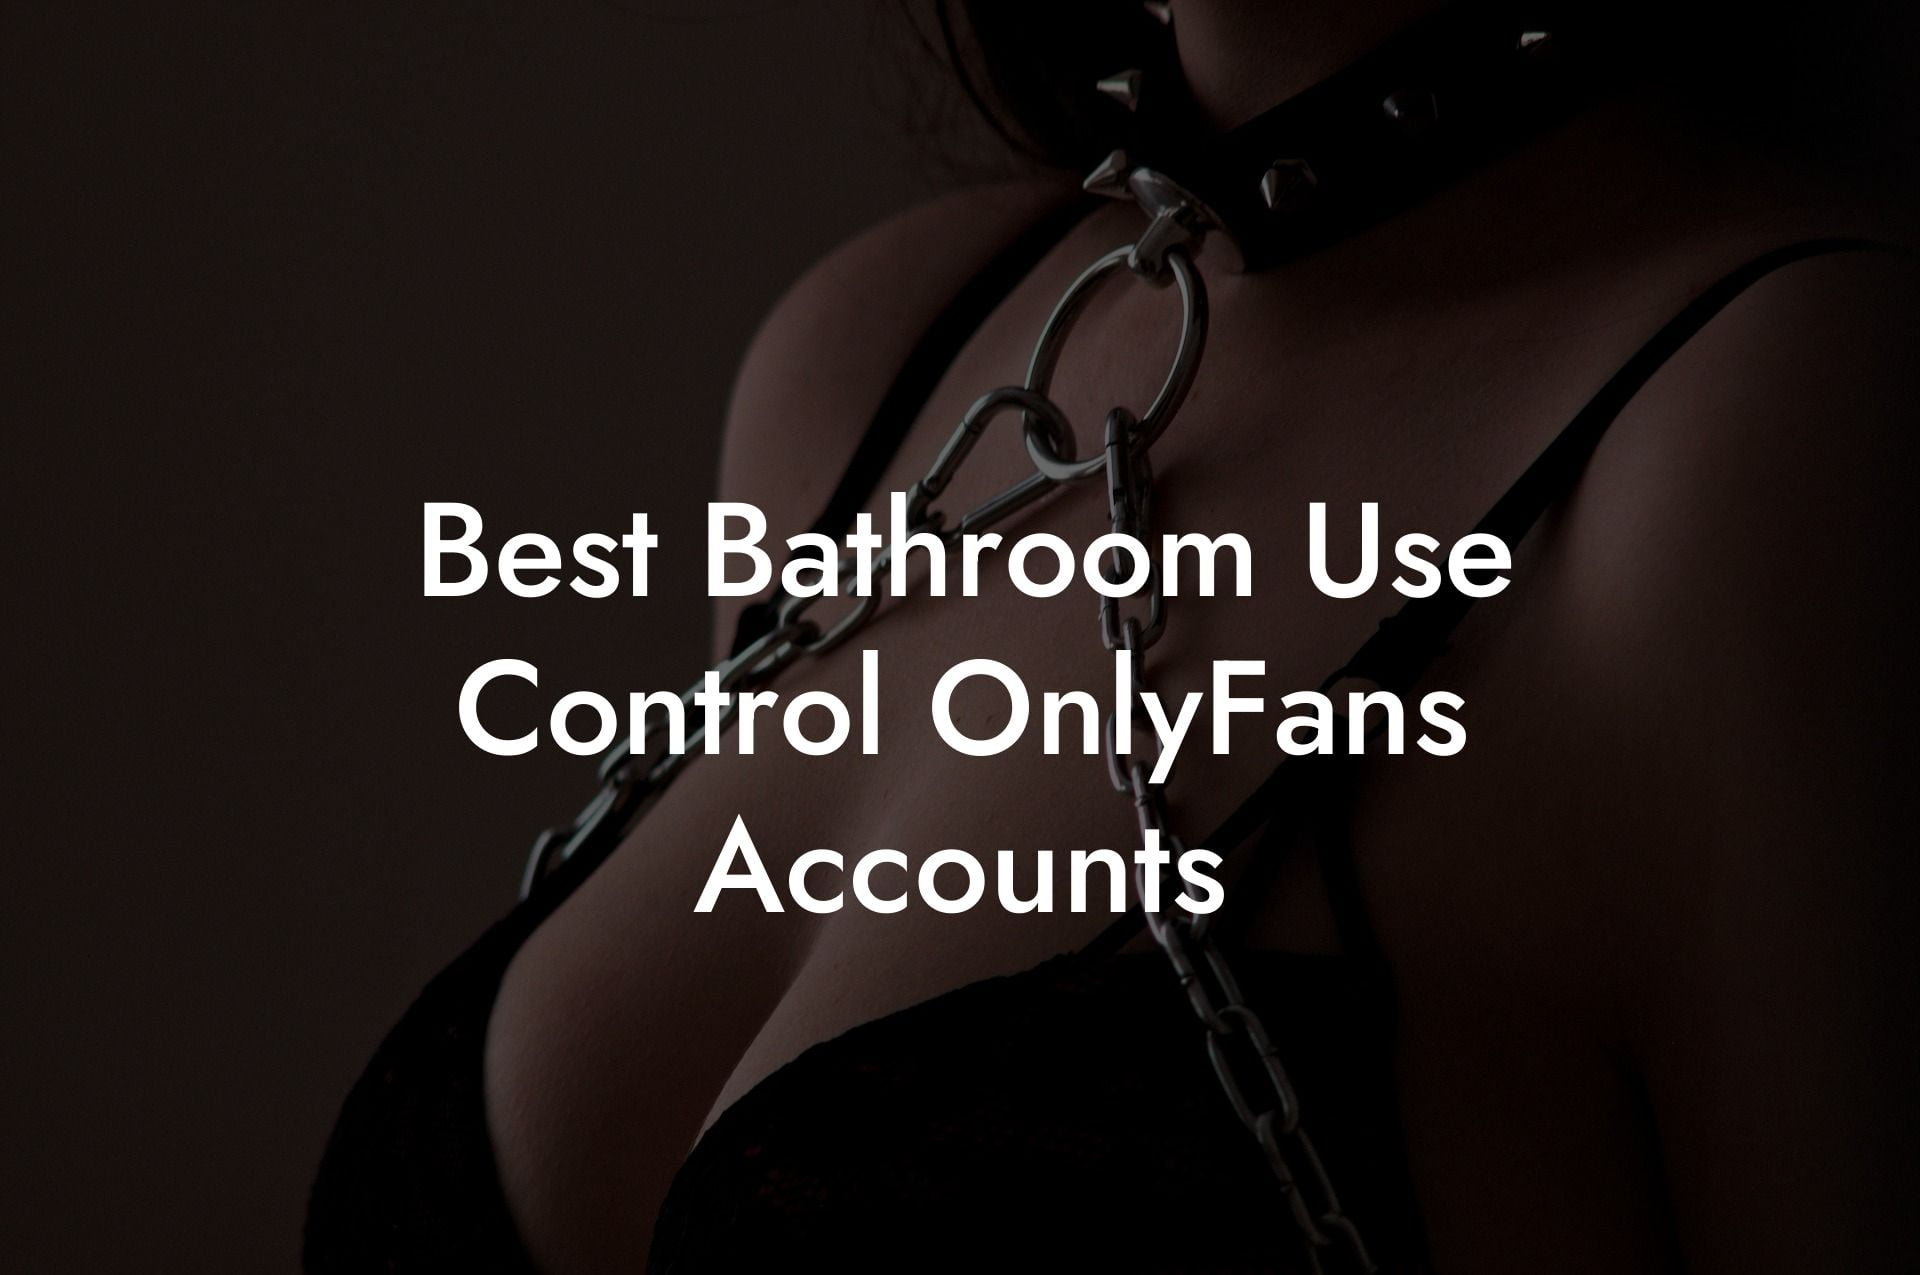 Best Bathroom Use Control OnlyFans Accounts